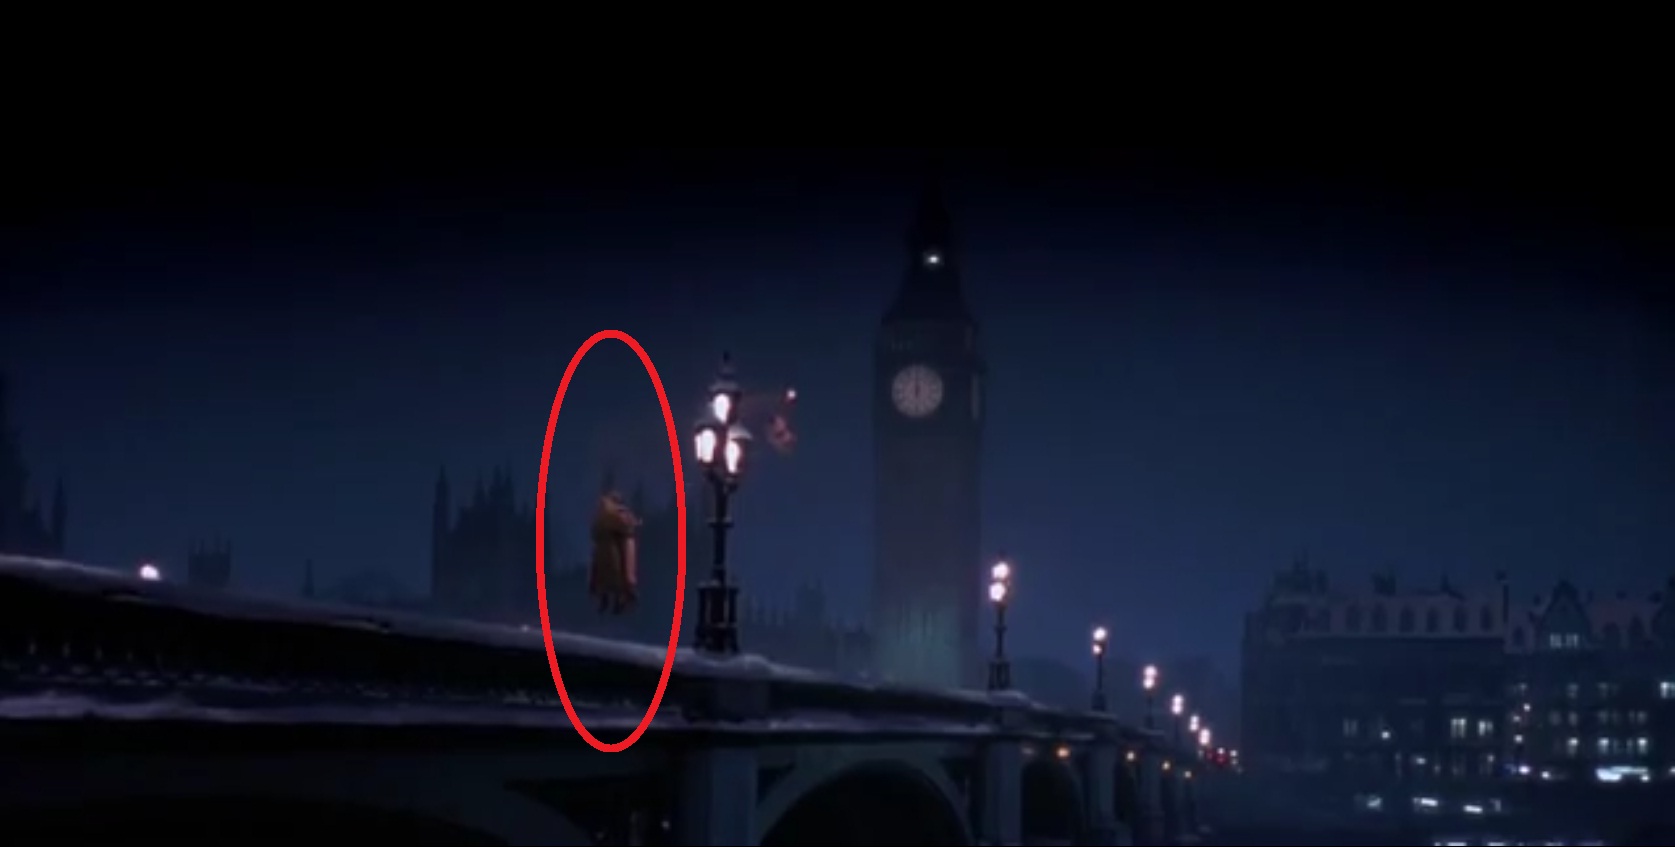 The couple kissing on the bridge as Tinkerbell flies Peter Pan away 

from London to Neverland in "Hook" are Carrie Fisher and George 

Lucas.